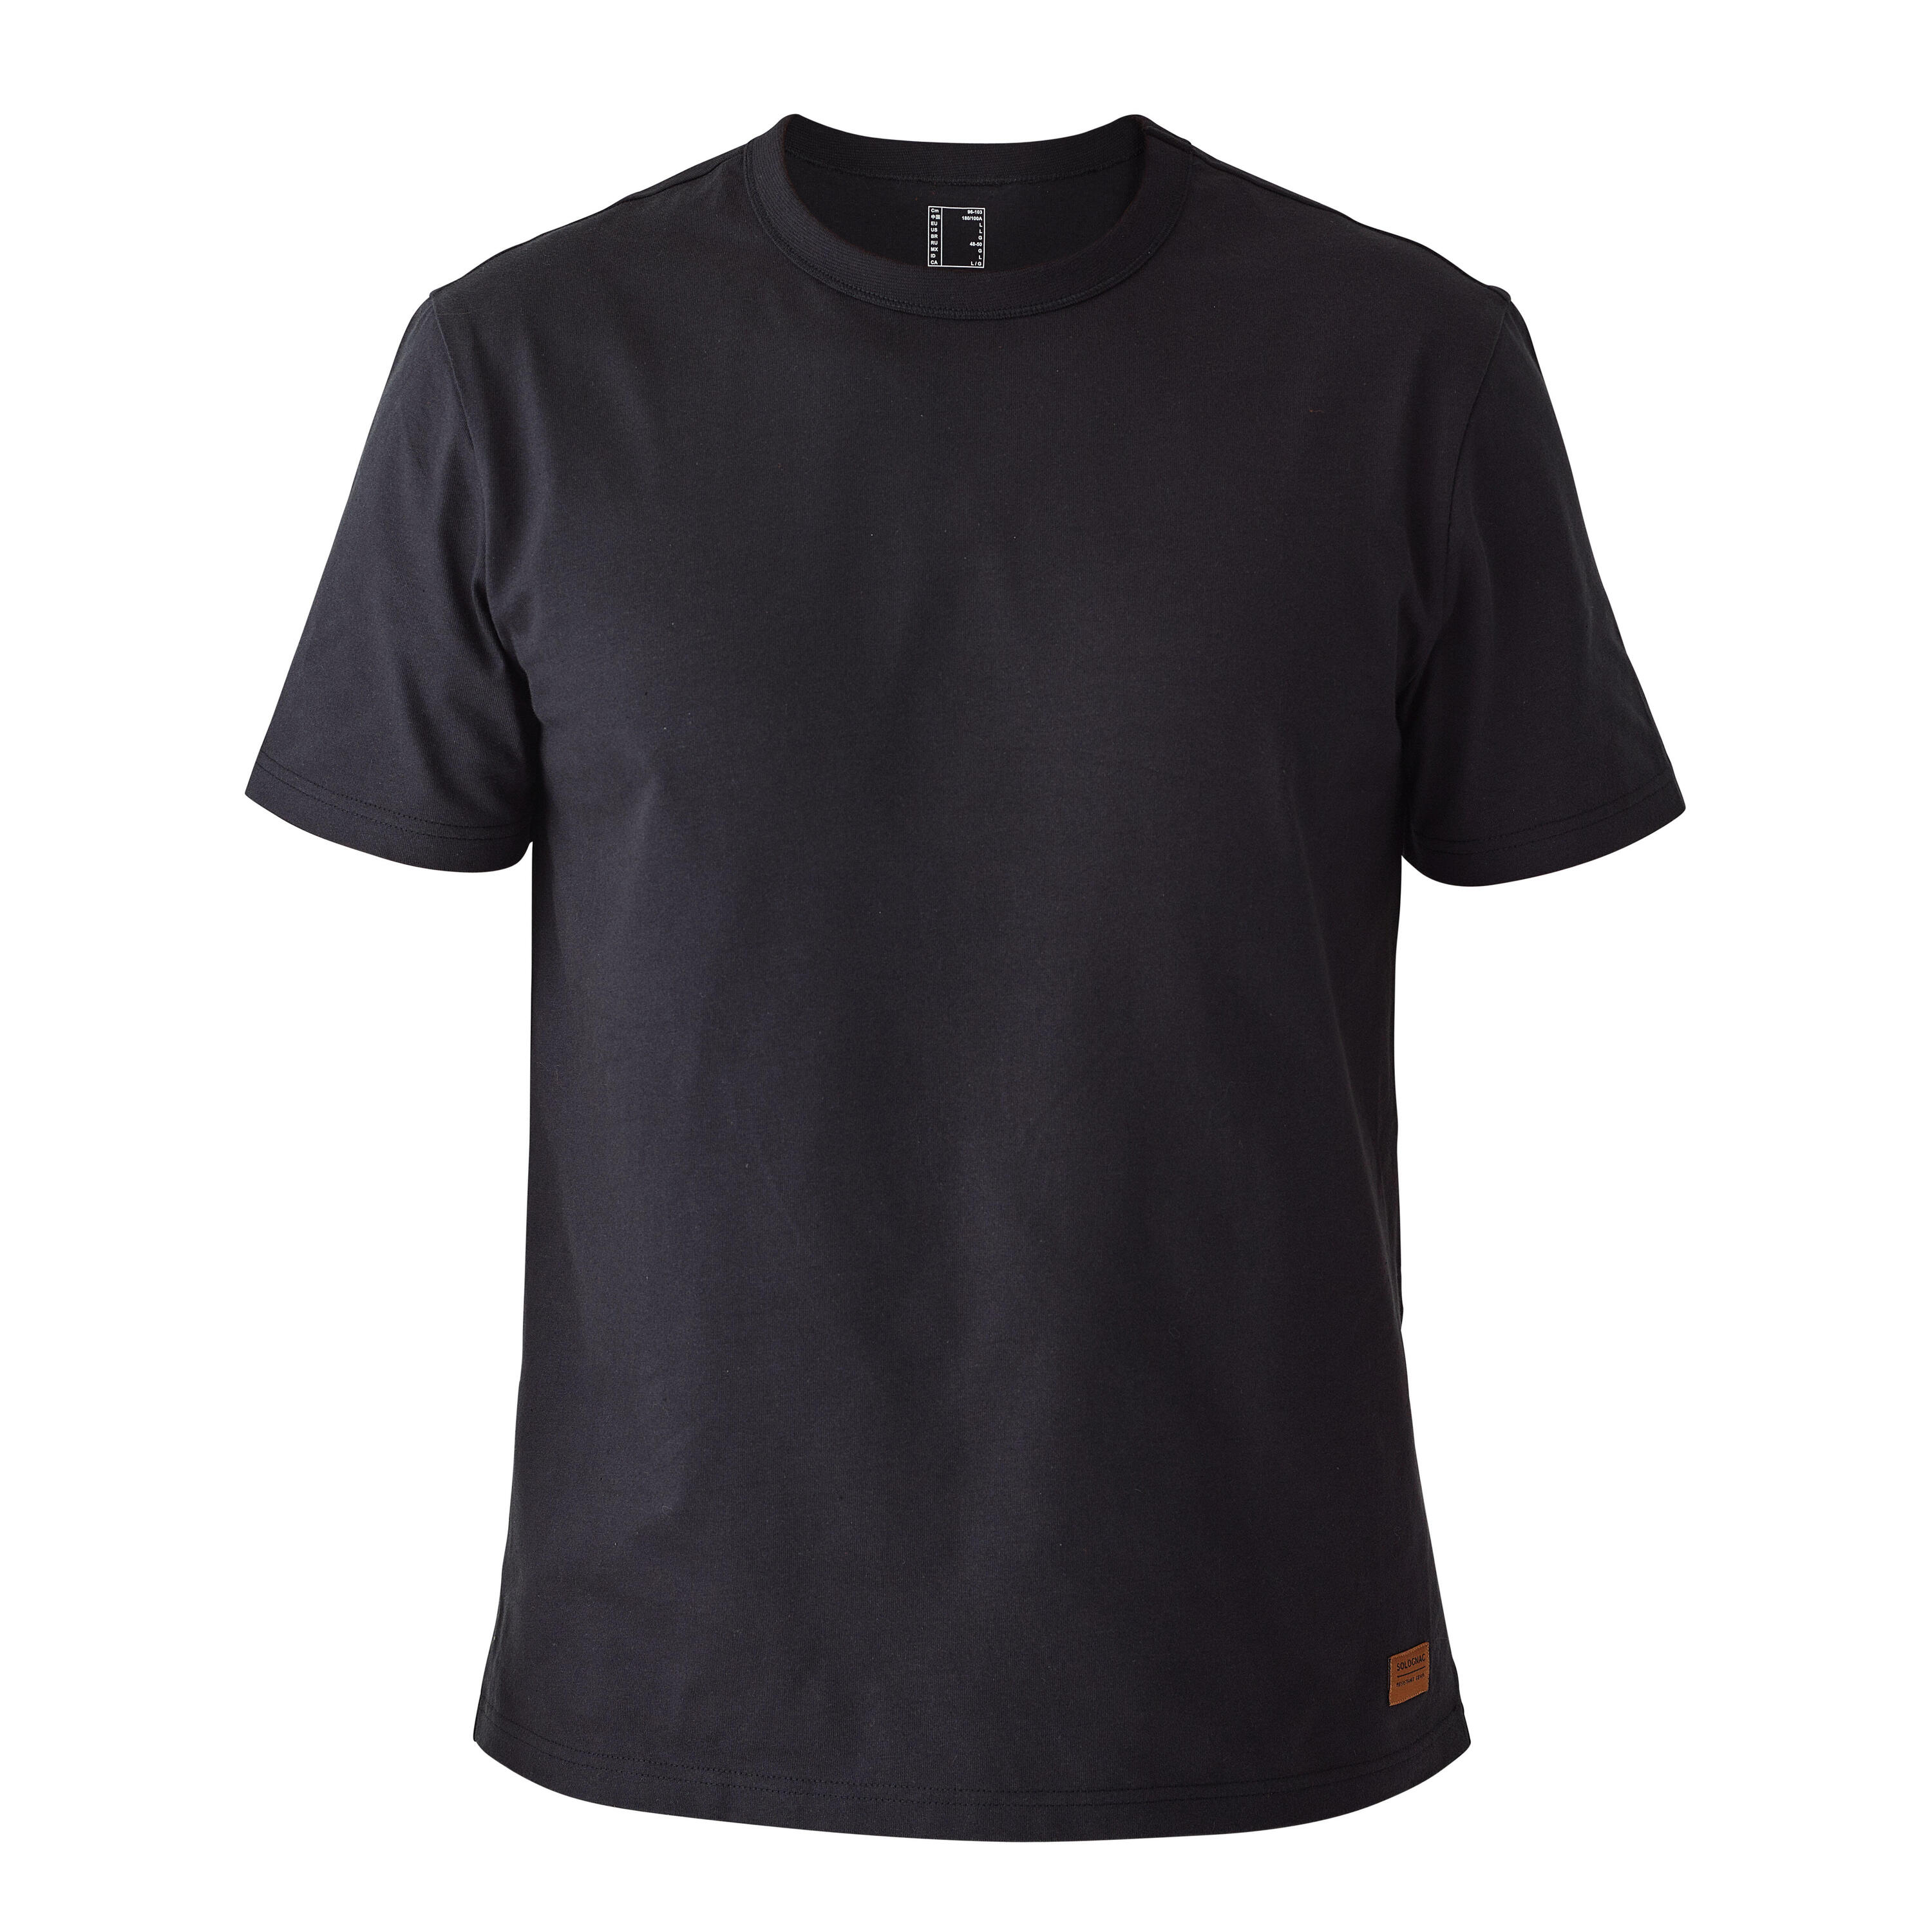 DURABLE T-SHIRT 500 BLACK WITH "RESISTANT GEAR" LOGO 3/5